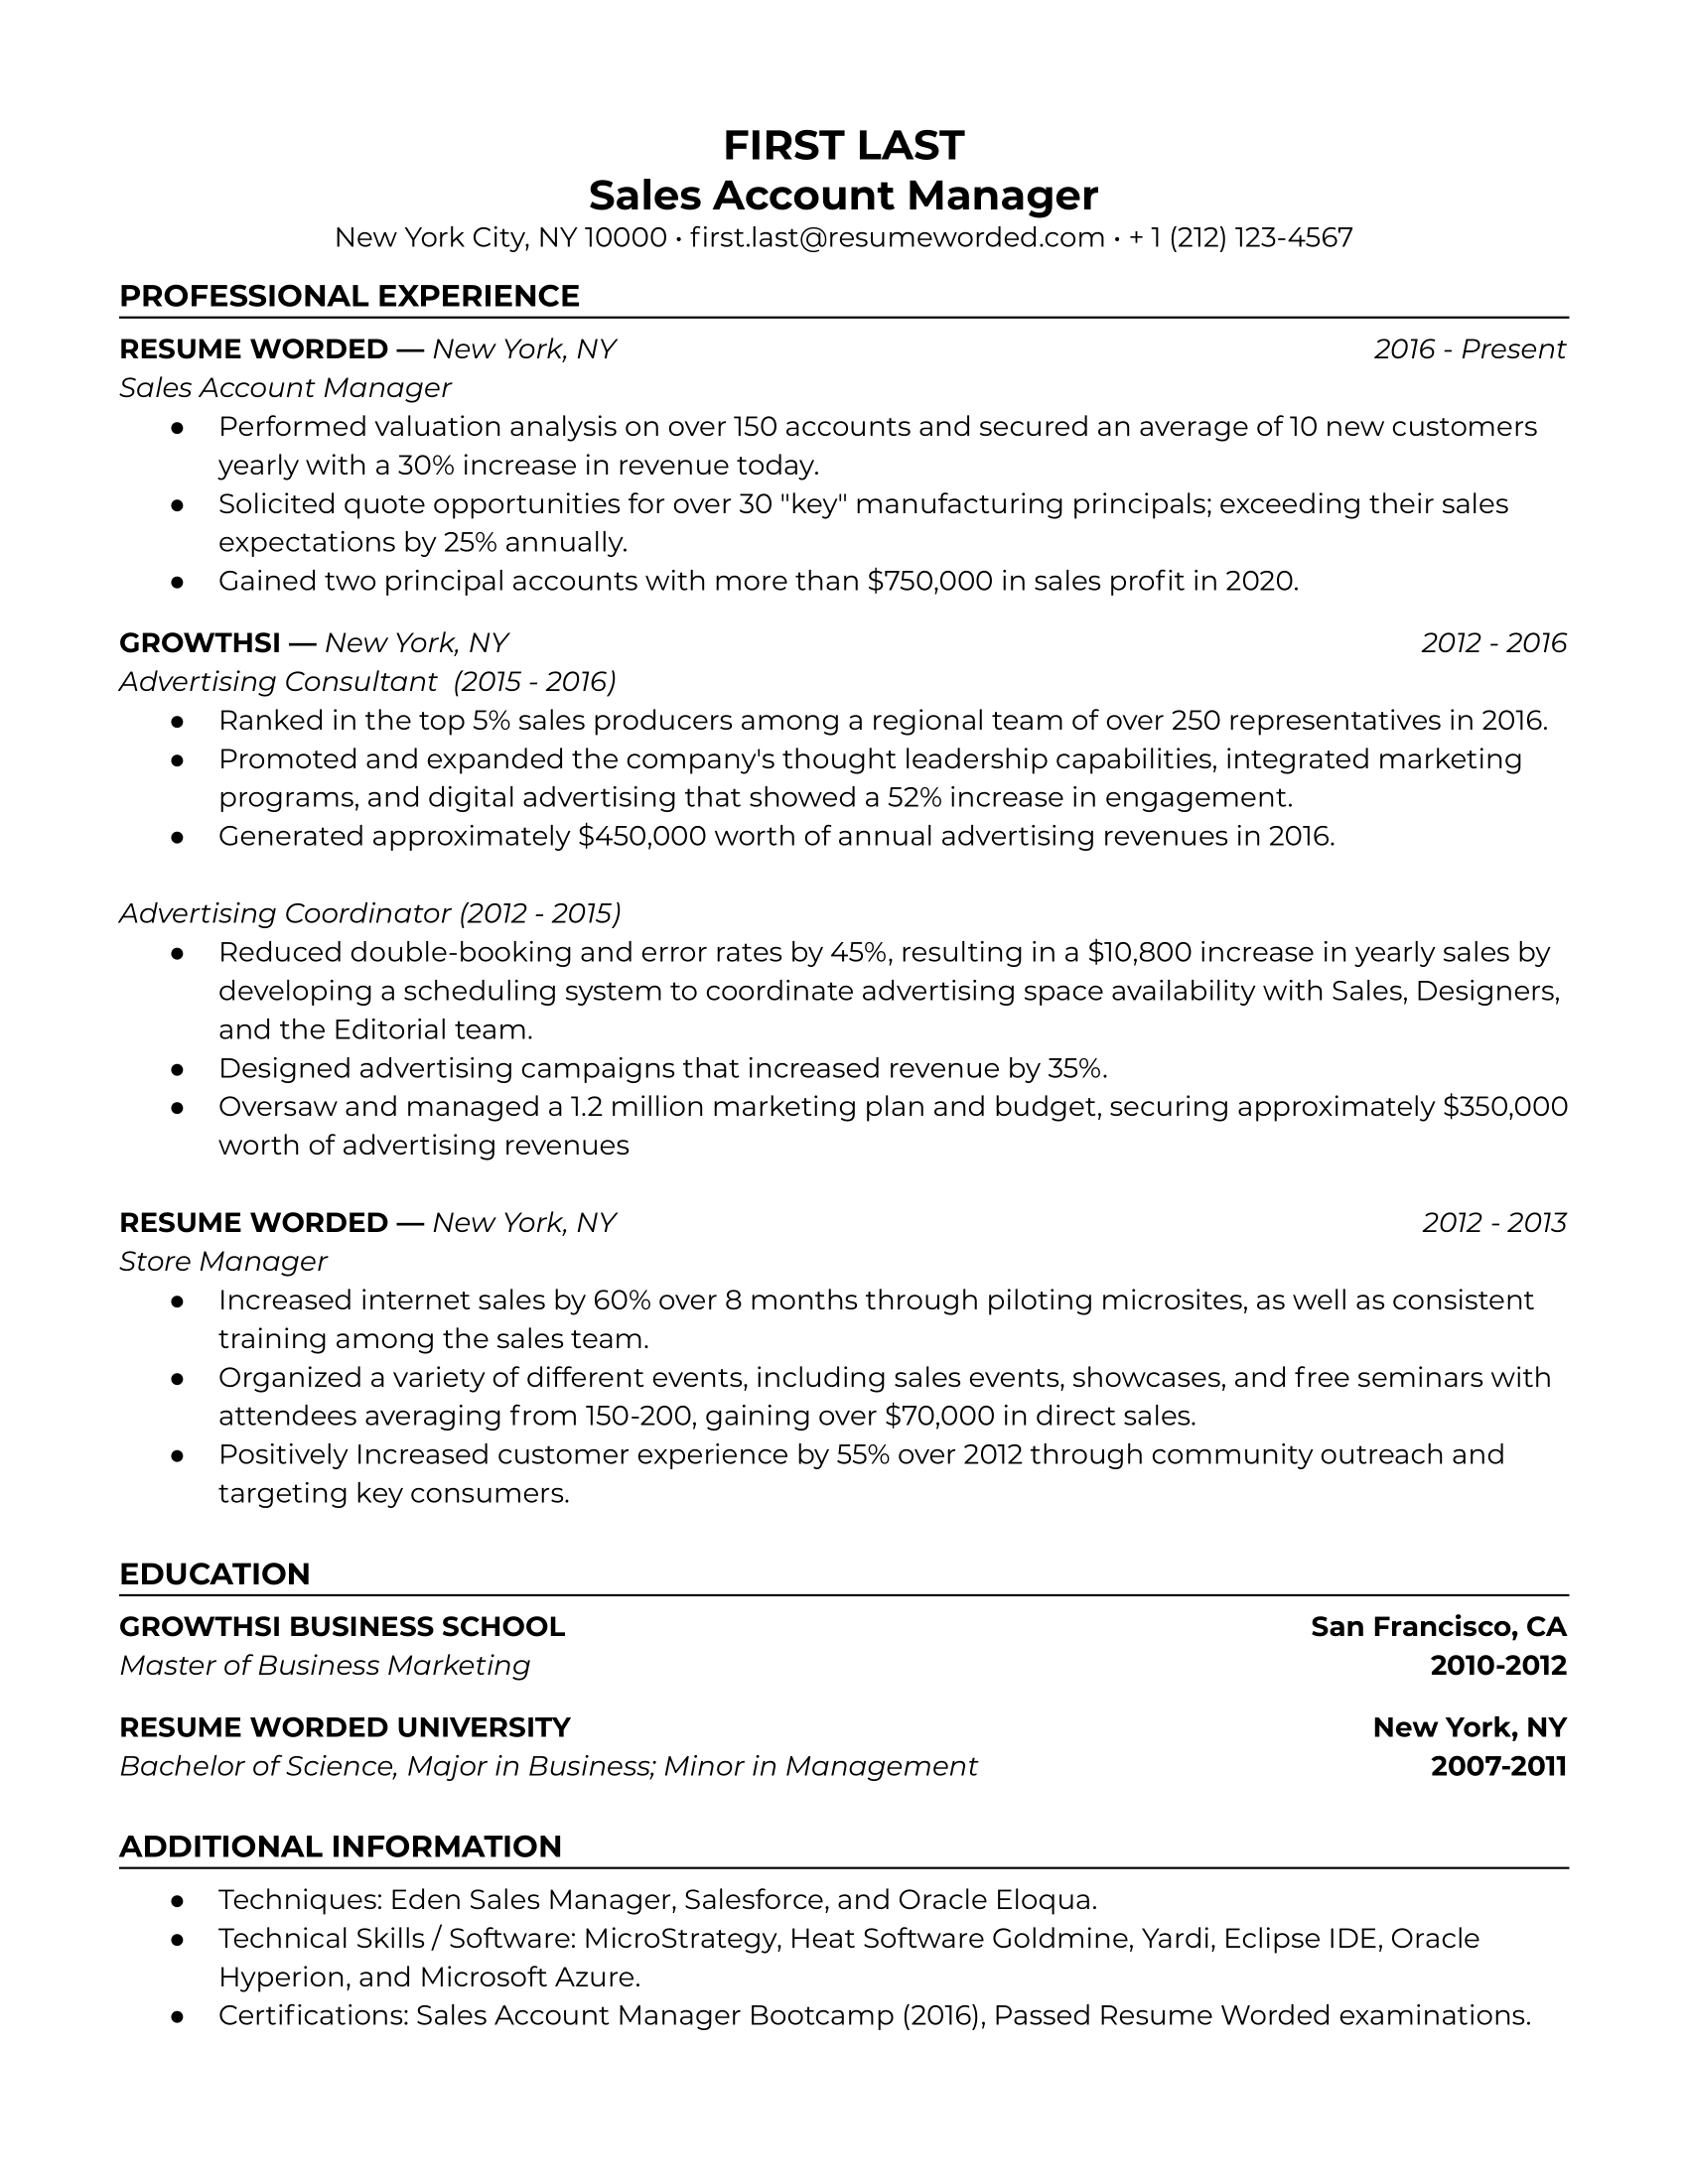 Sales Account Manager Resume Template + Example